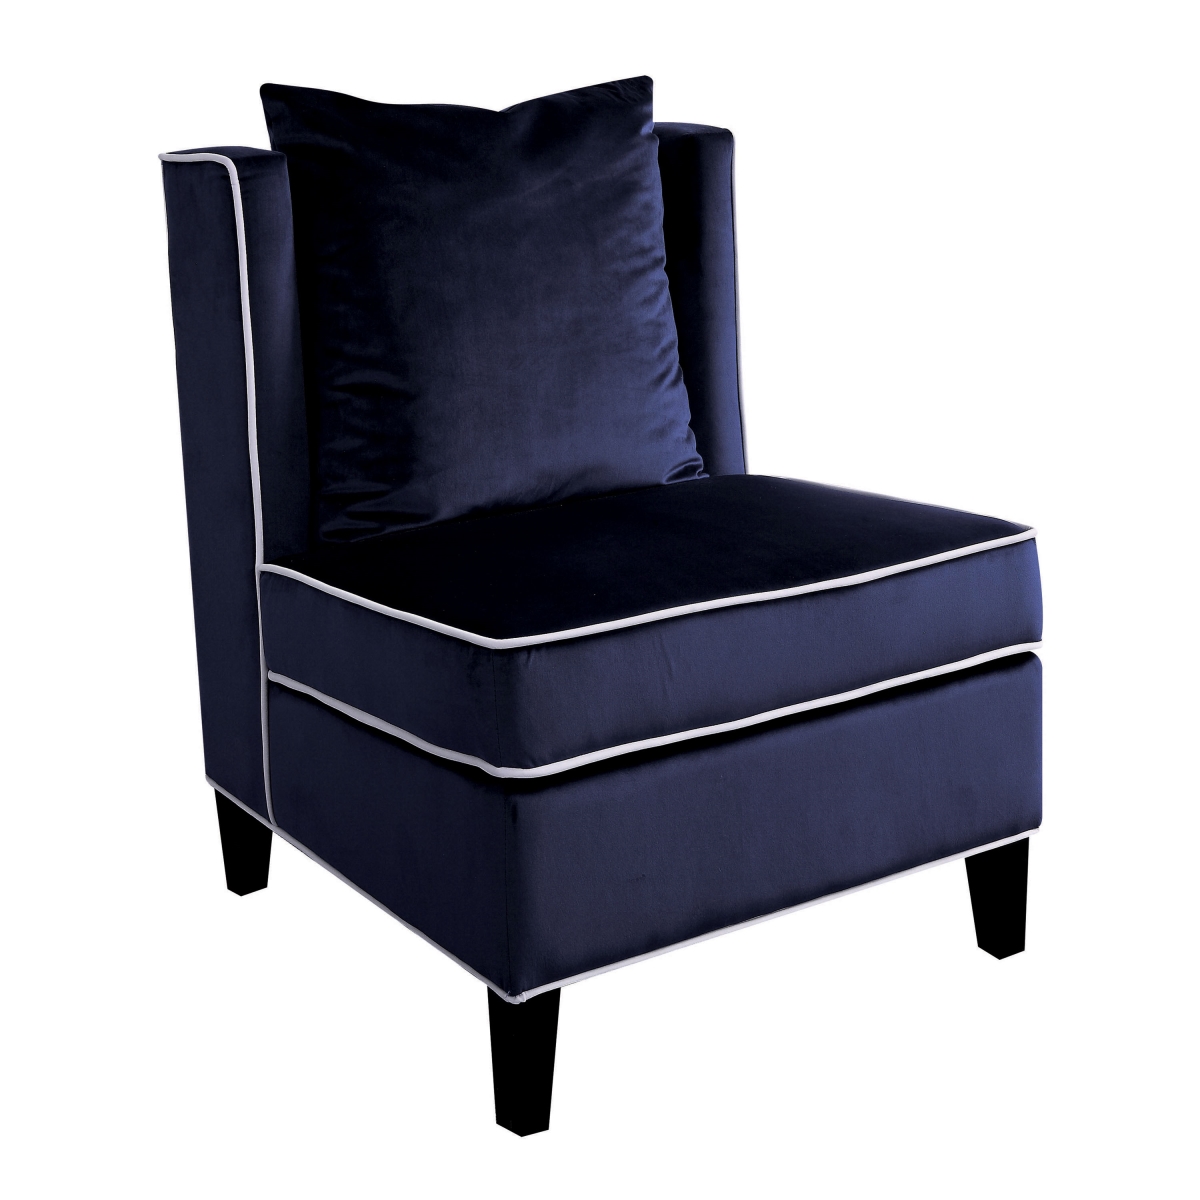 Home Roots Furniture 286191 39 X 29 X 32 In. Velvet & Plywood With Foam Accent Chair - Dark Blue